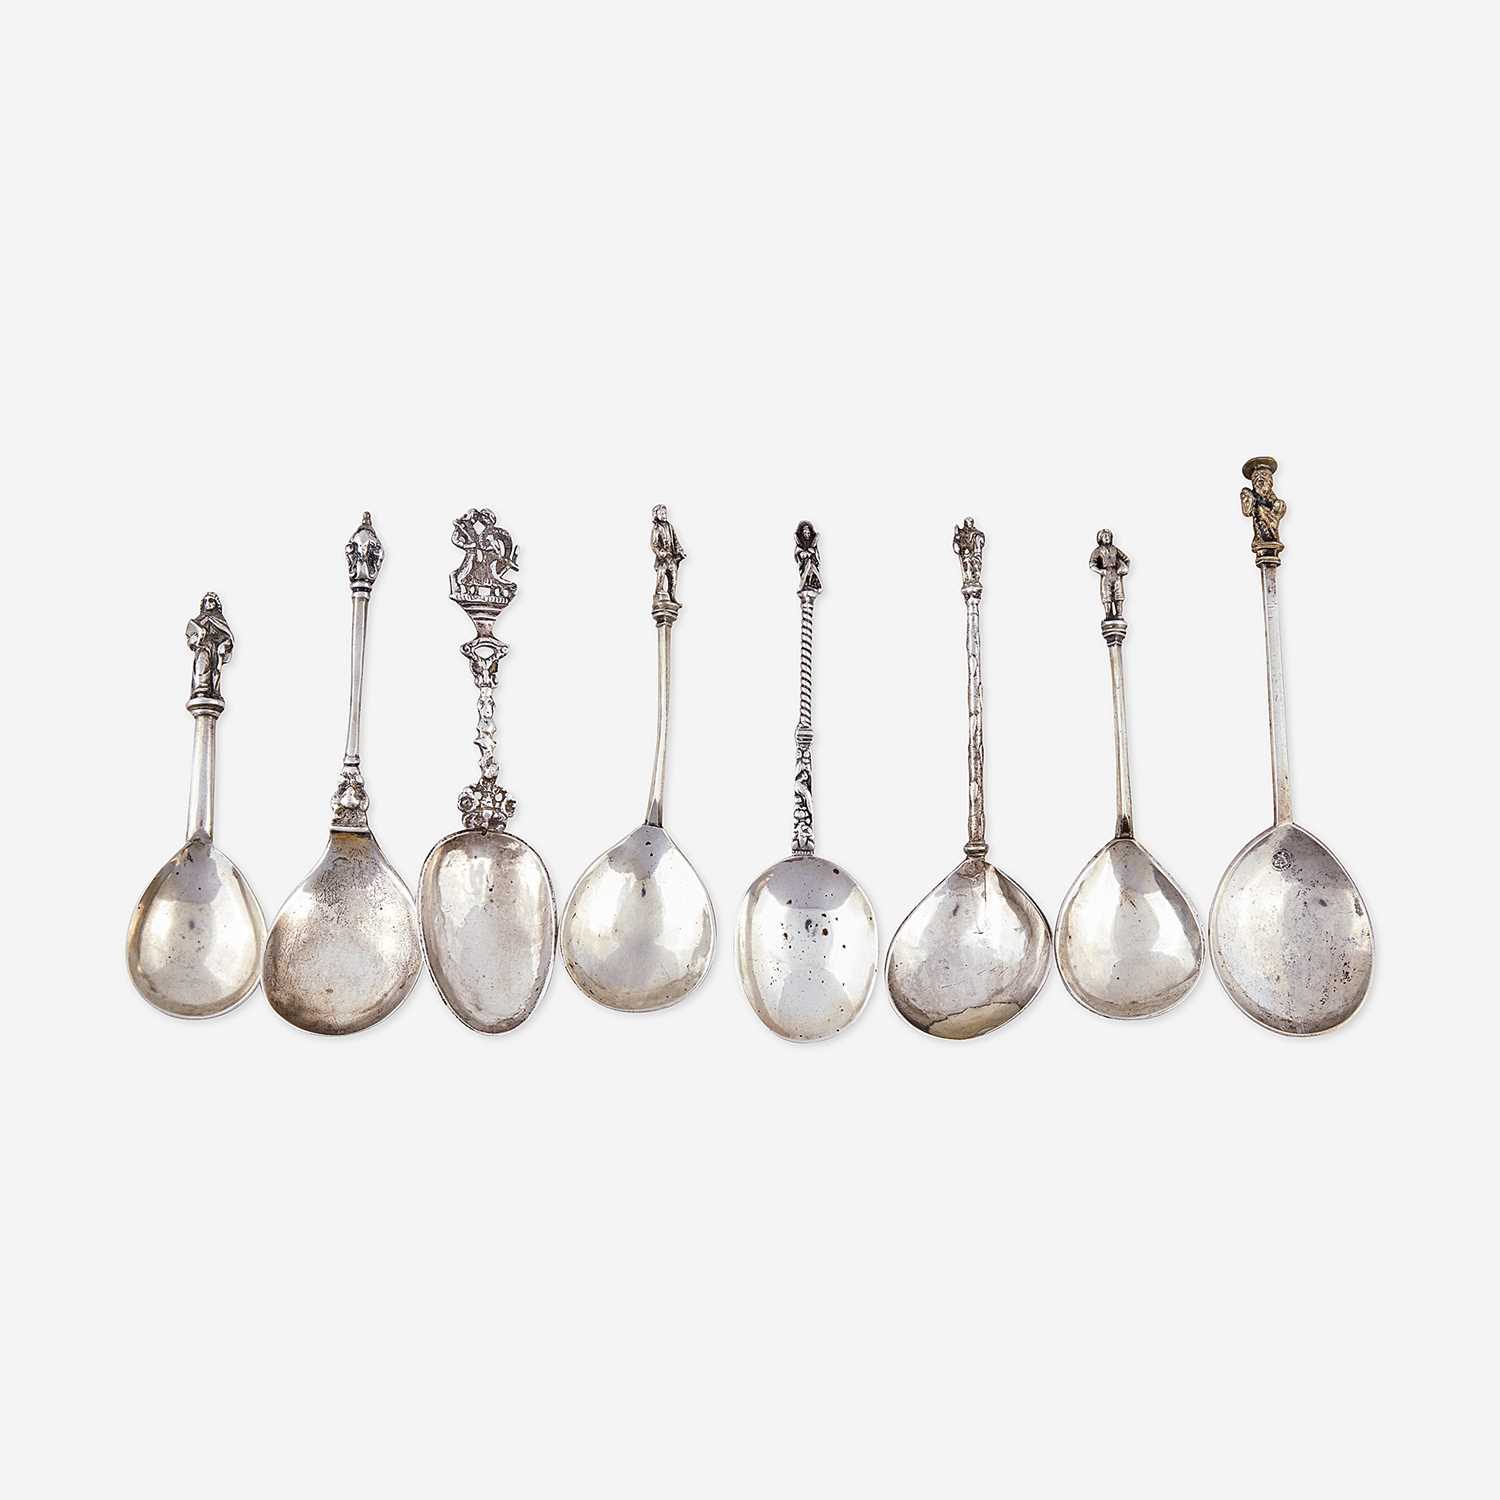 Lot 15 - A group of eight Continental silver apostle spoons